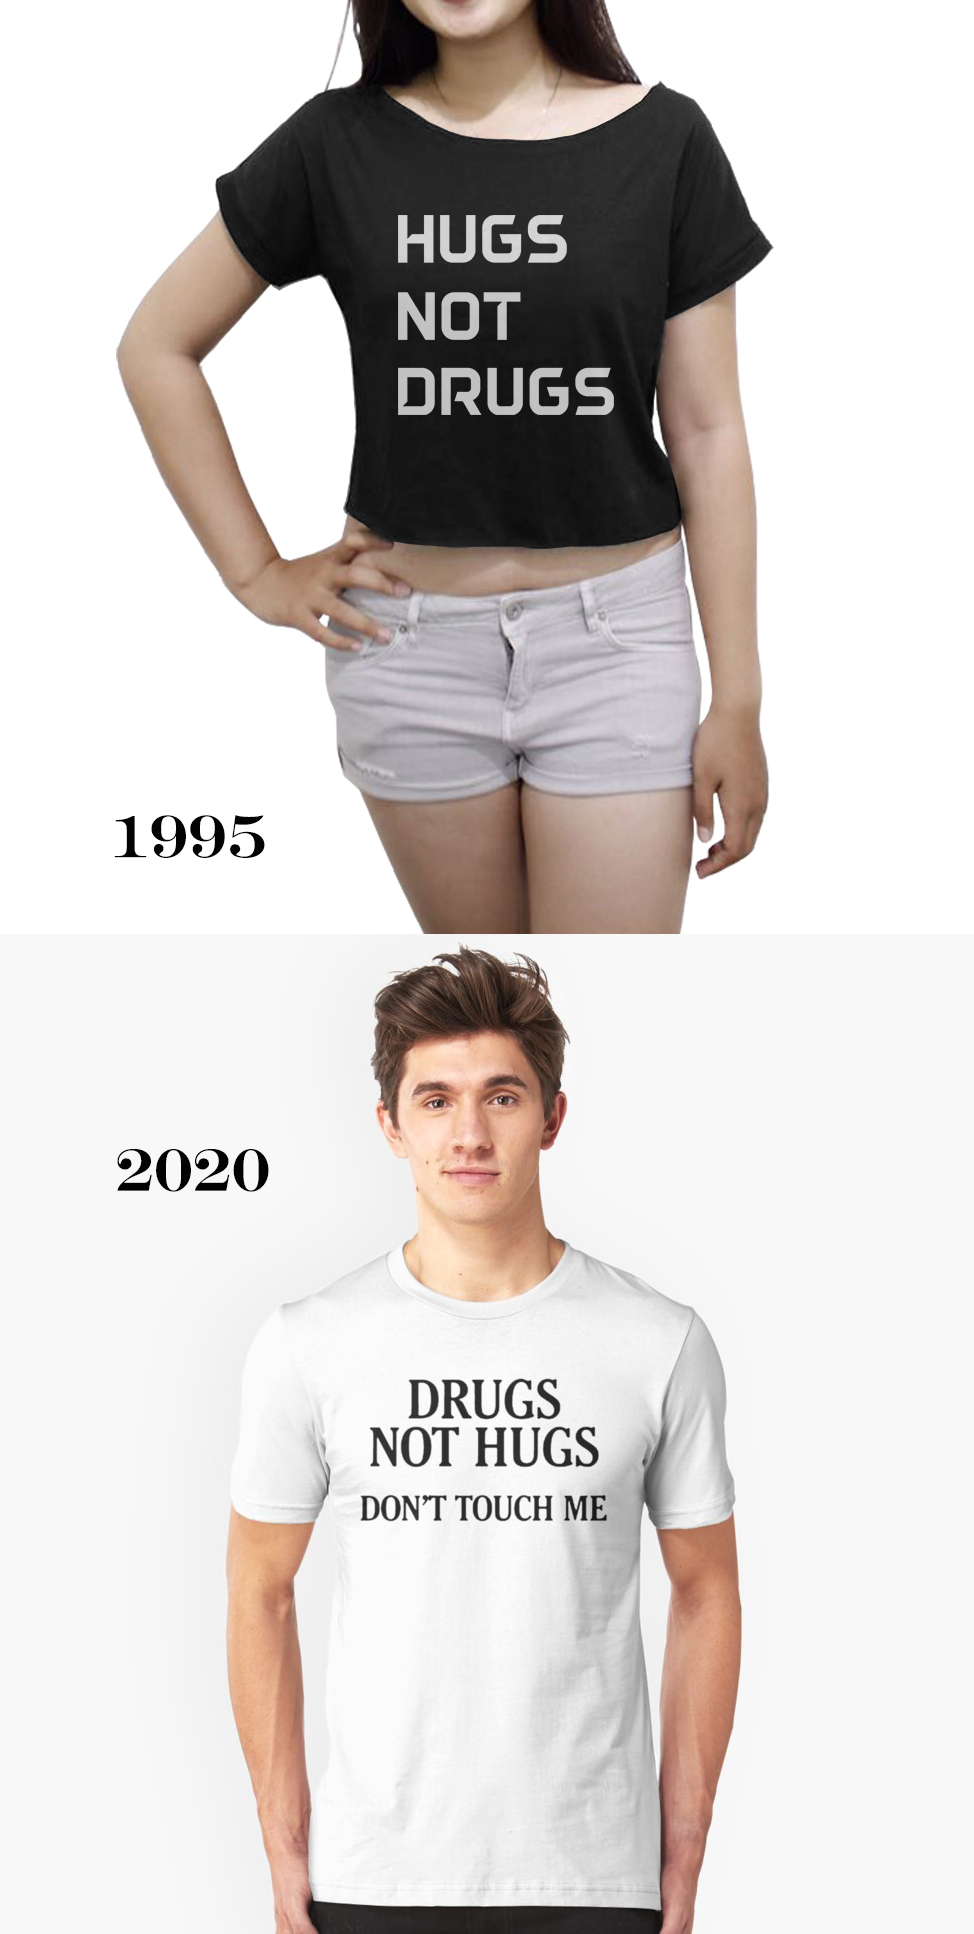 space crop tops - Hugs Not Drugs 1995 2020 Drugs Not Hugs Dont Touch Me